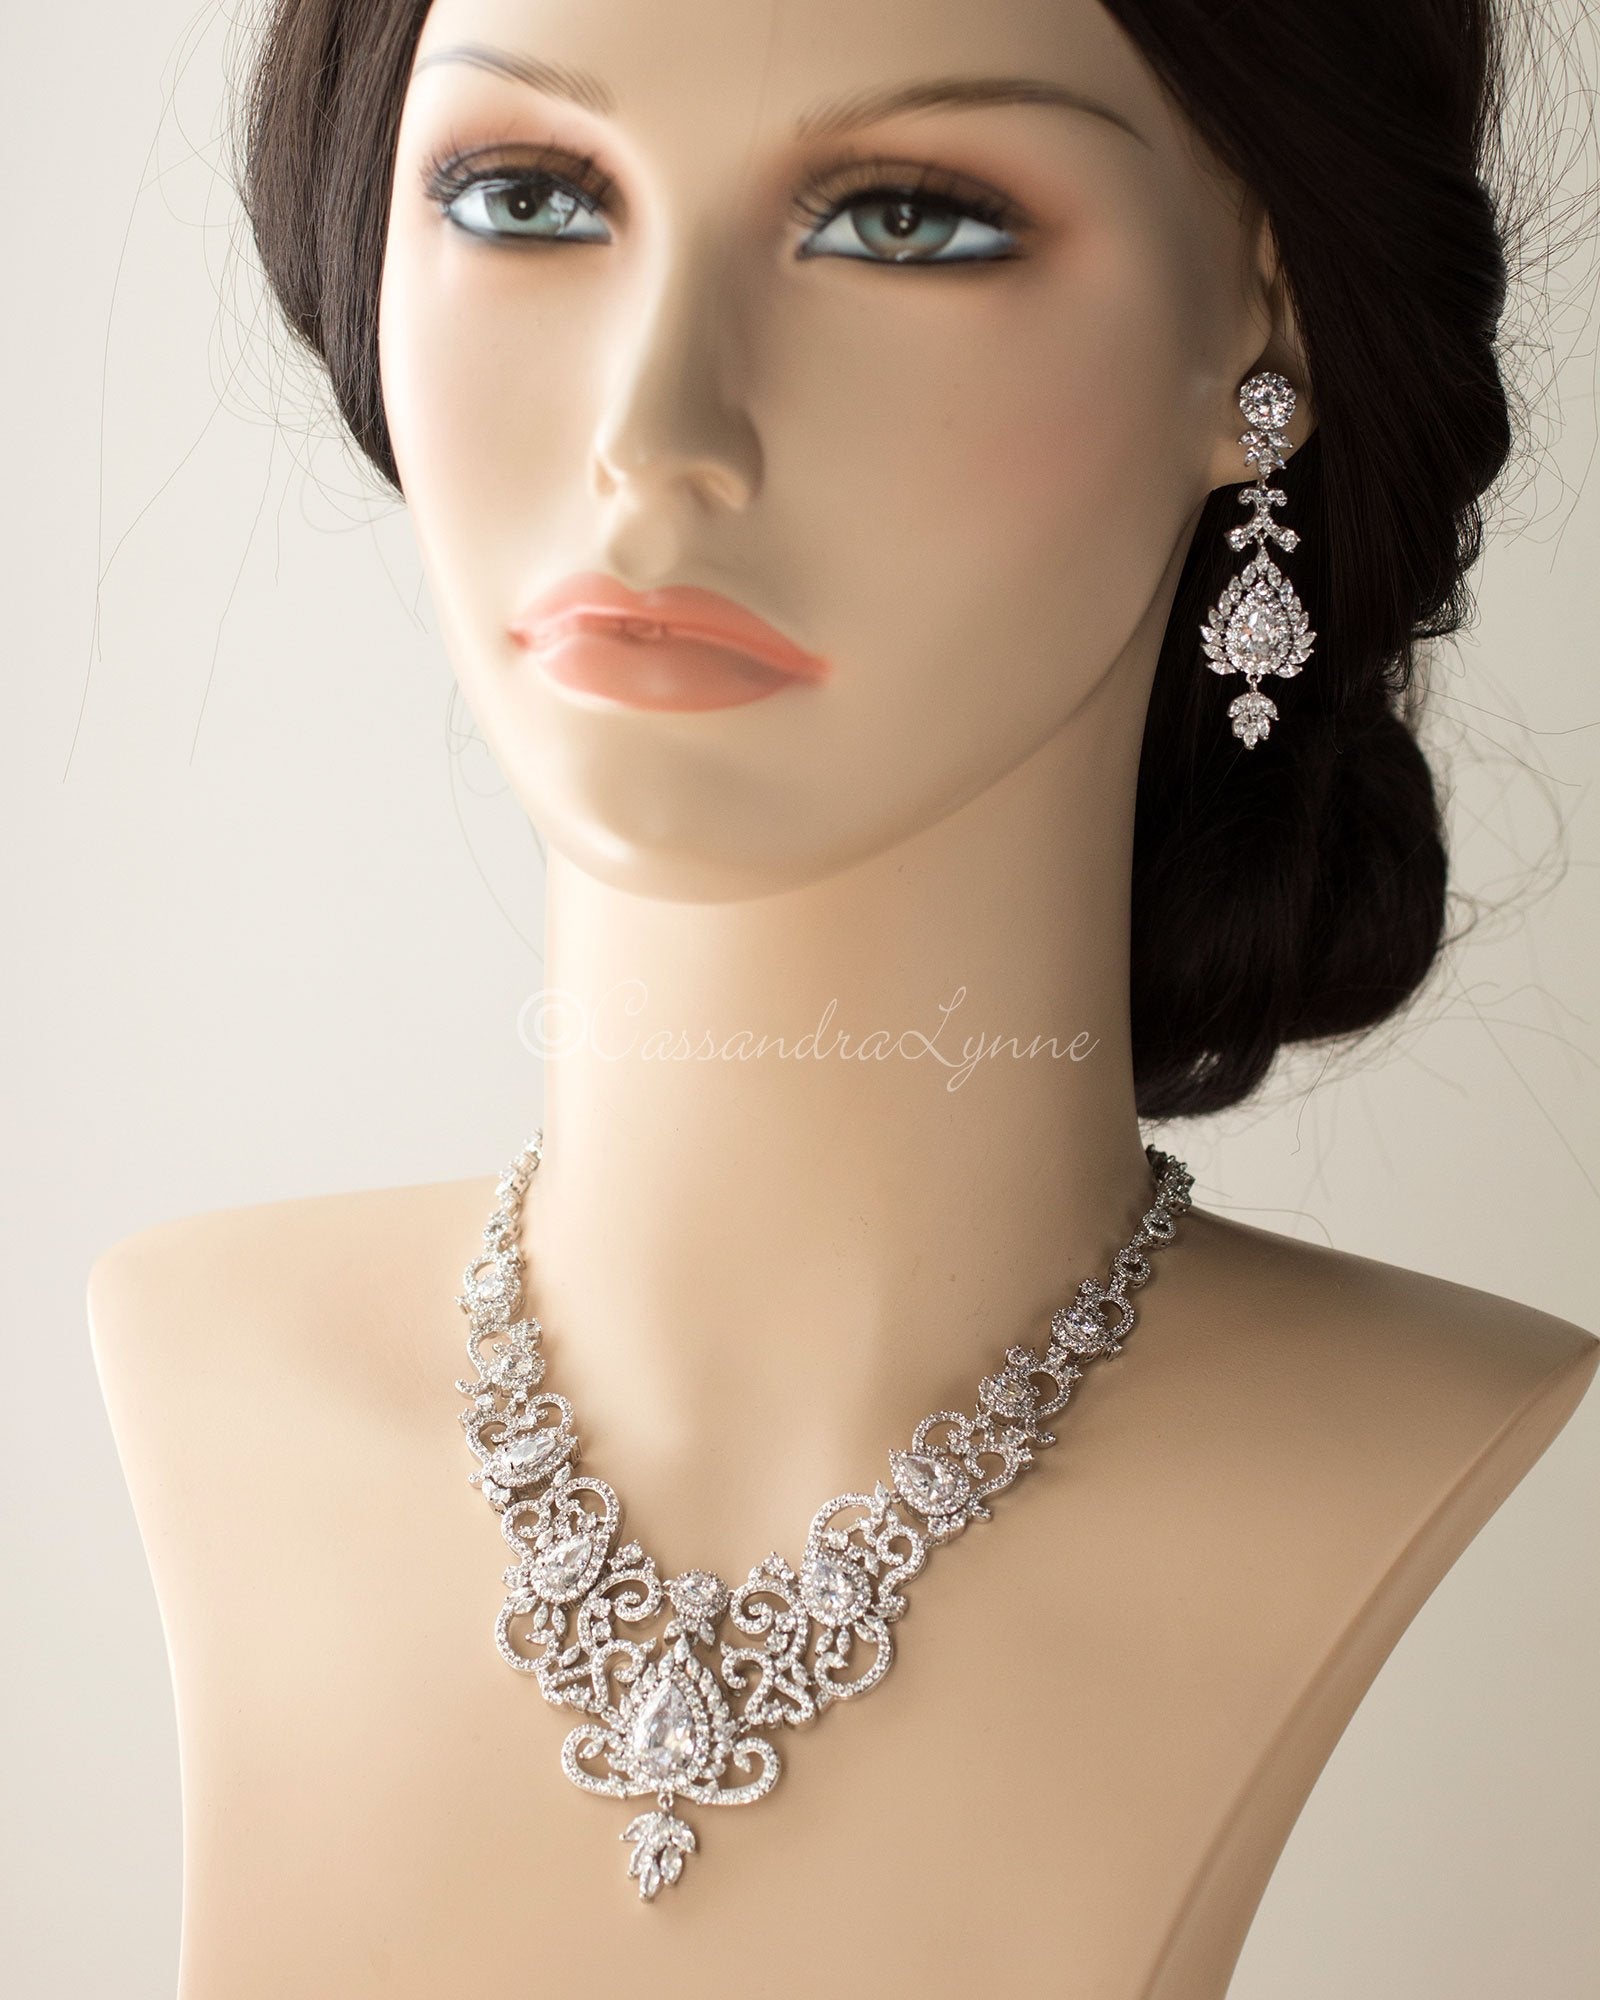 Luxury CZ Bridal Necklace and Earrings - Cassandra Lynne